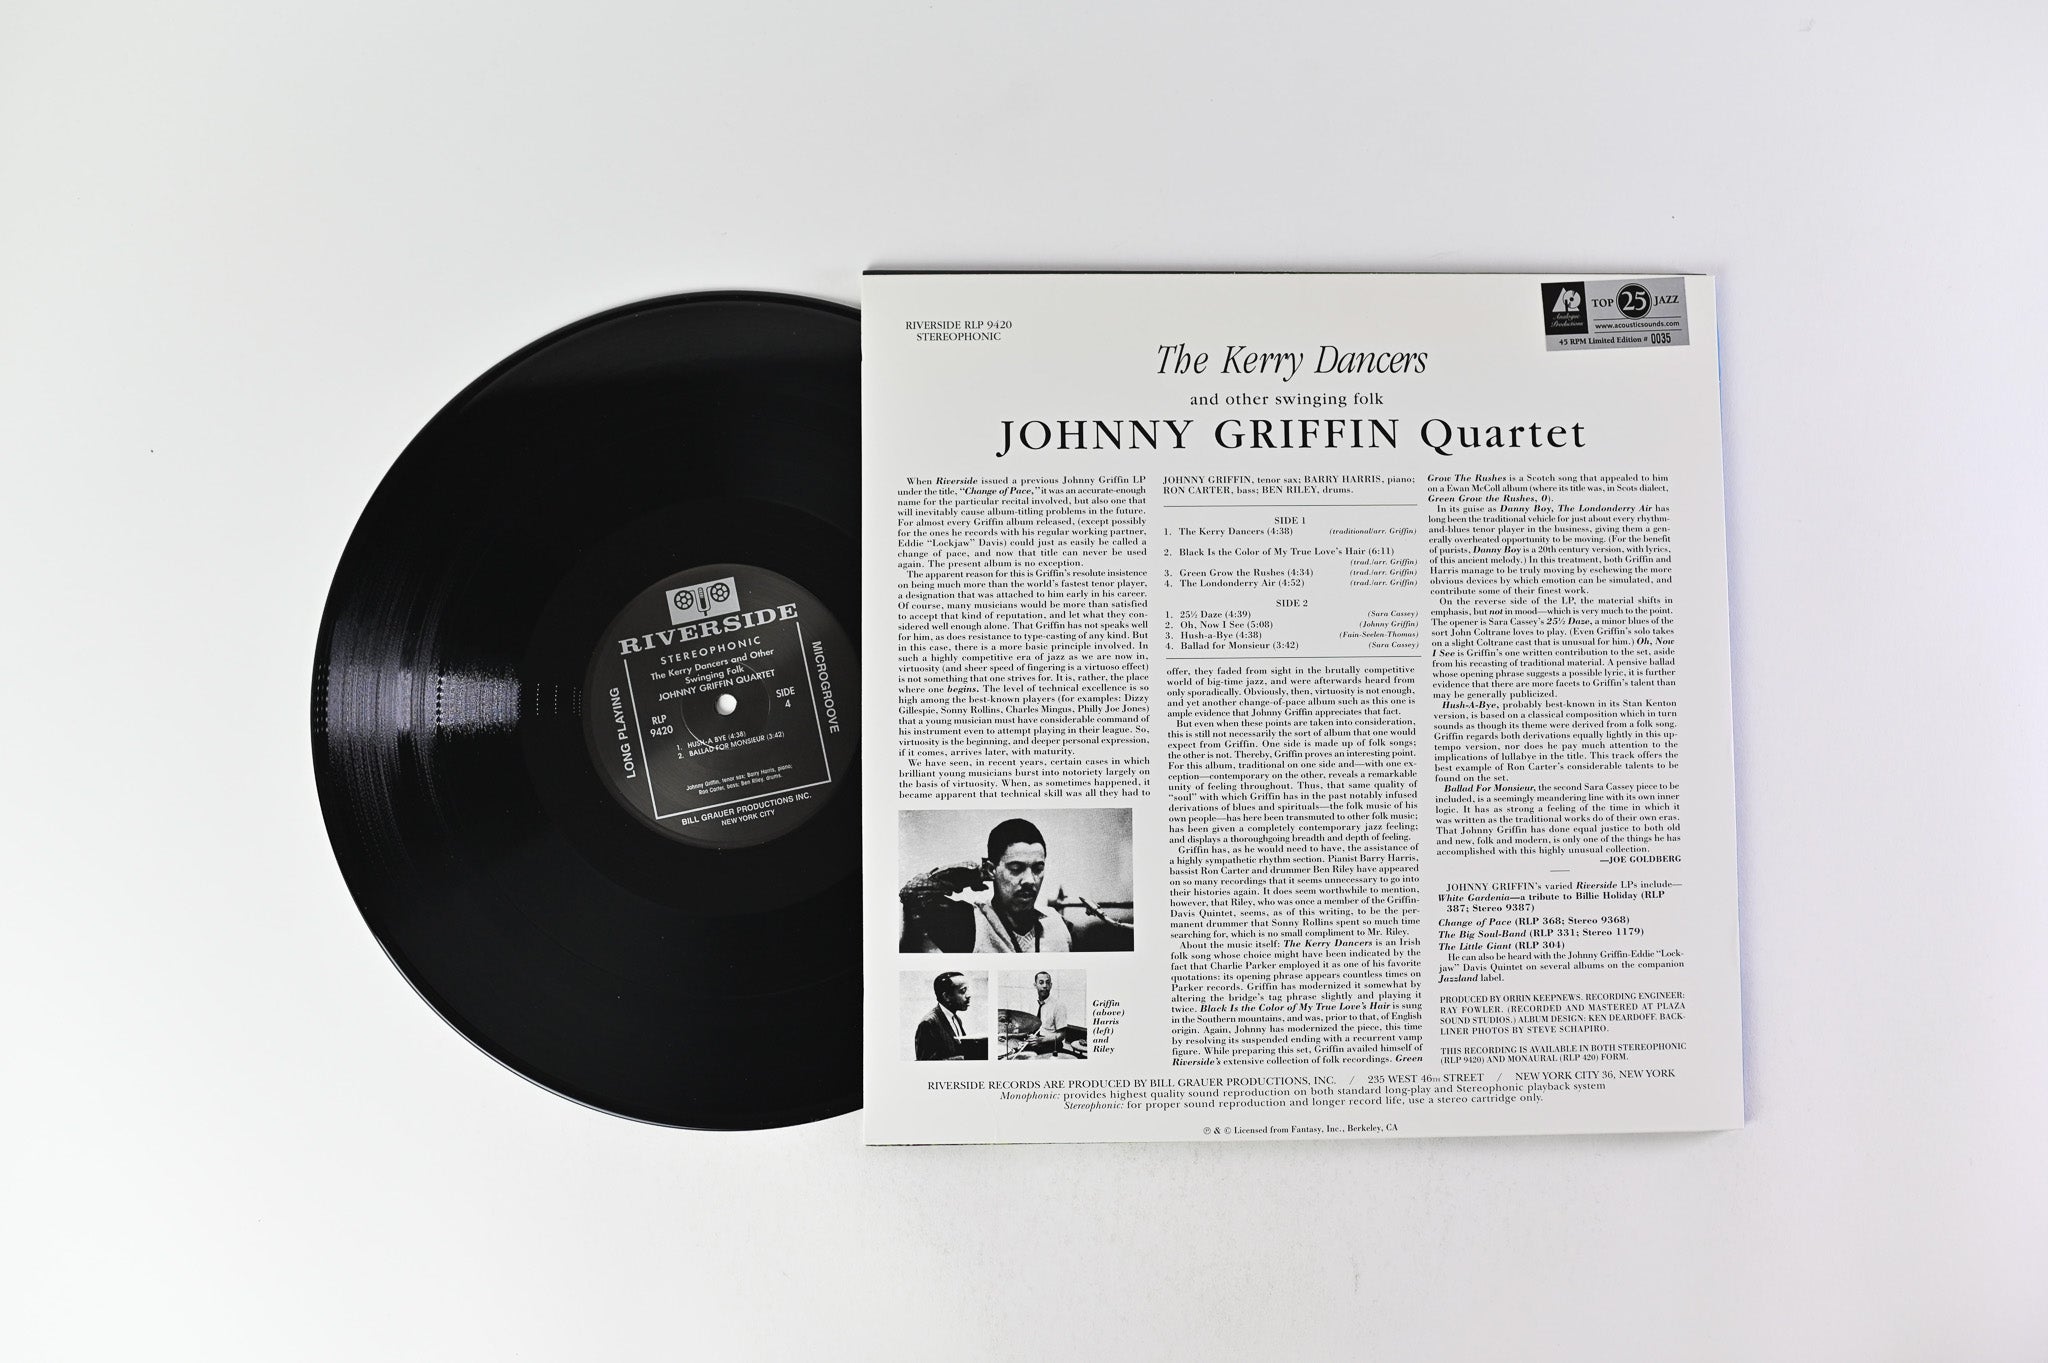 The Johnny Griffin Quartet - The Kerry Dancers on Analogue Productions 45 RPM